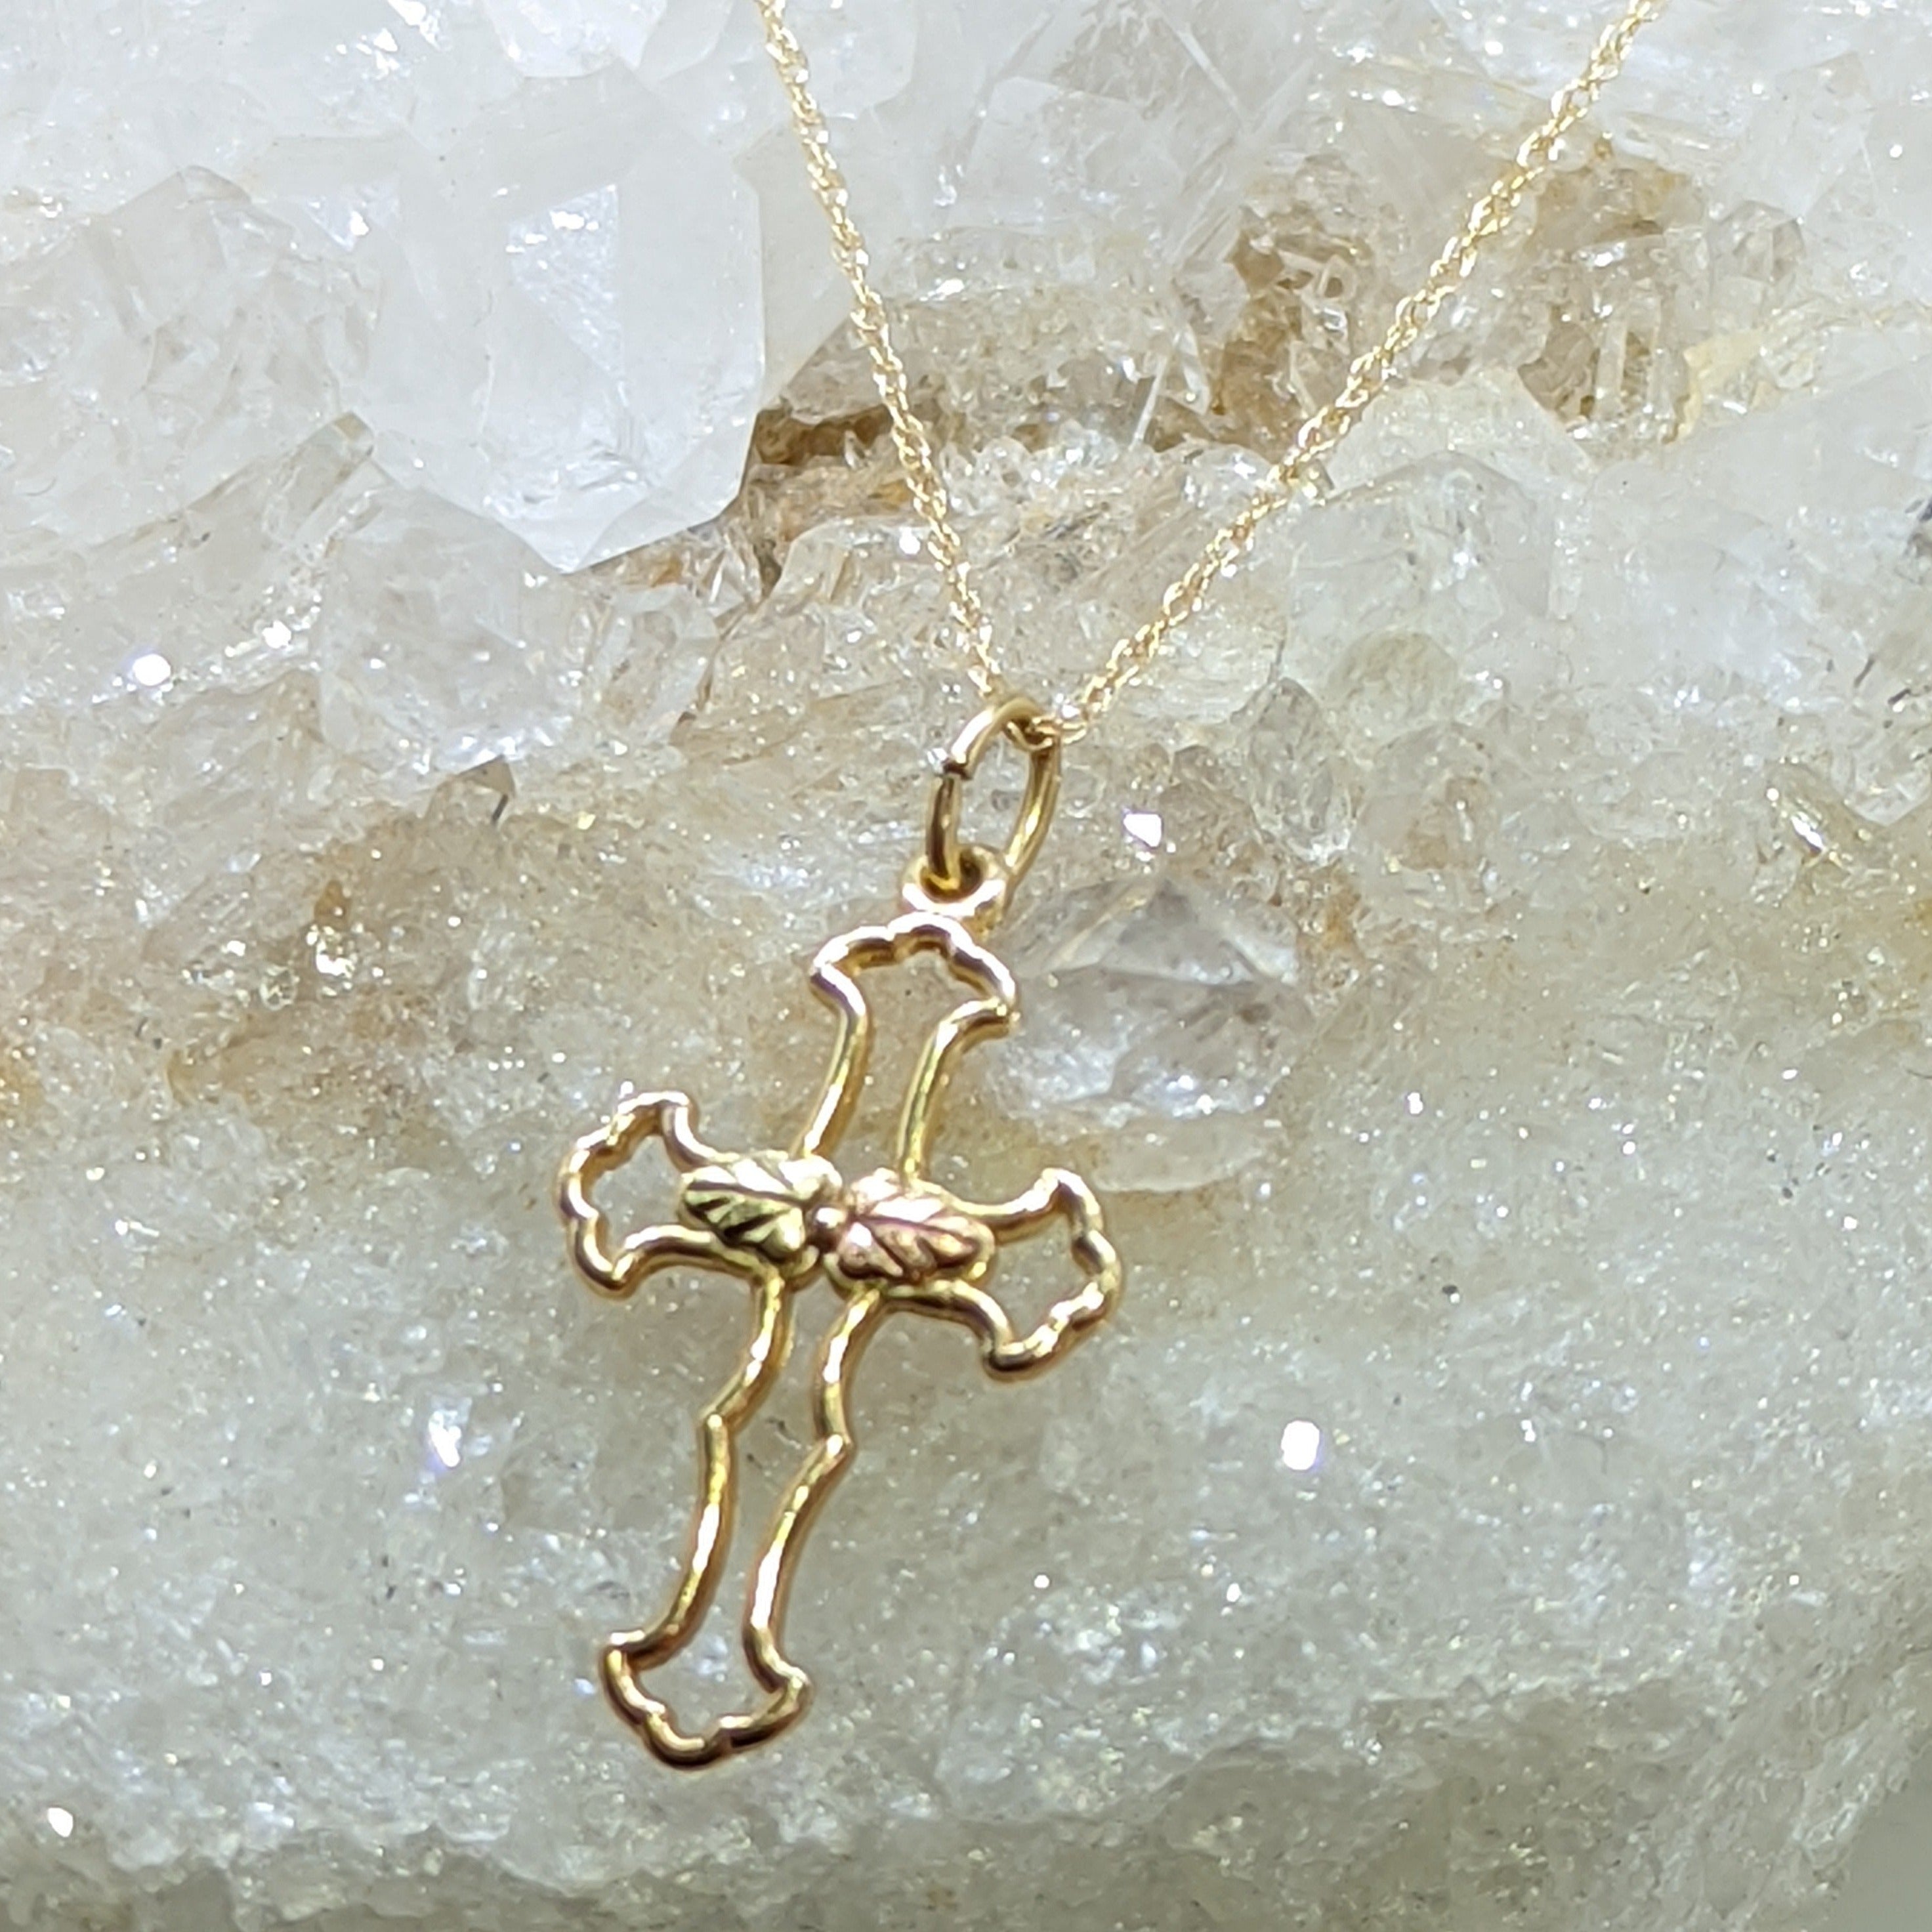 Buy Gold Cross Necklace, Small Cross Necklace Silver Cross Necklace Women,  Dainty Cross Necklace Gold Cross Pendant Women Necklaces UK Online in India  - Etsy